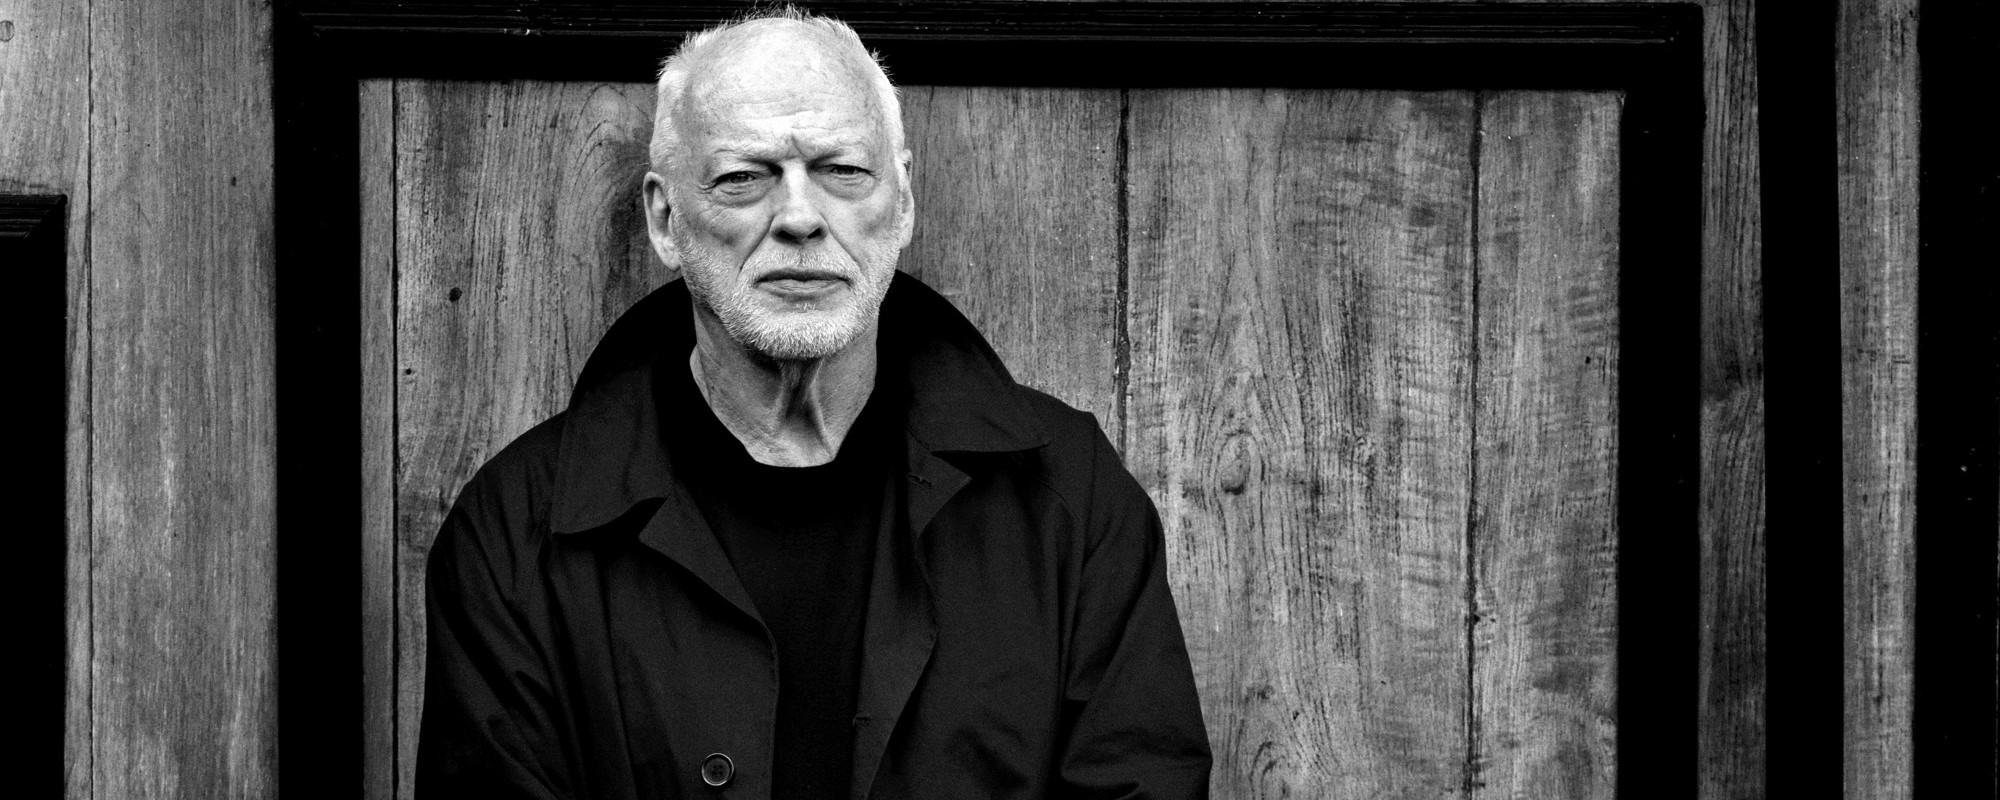 David Gilmour Admits “an Unwillingness” to Perform ’70s-Era Pink Floyd Songs for New Solo Tour